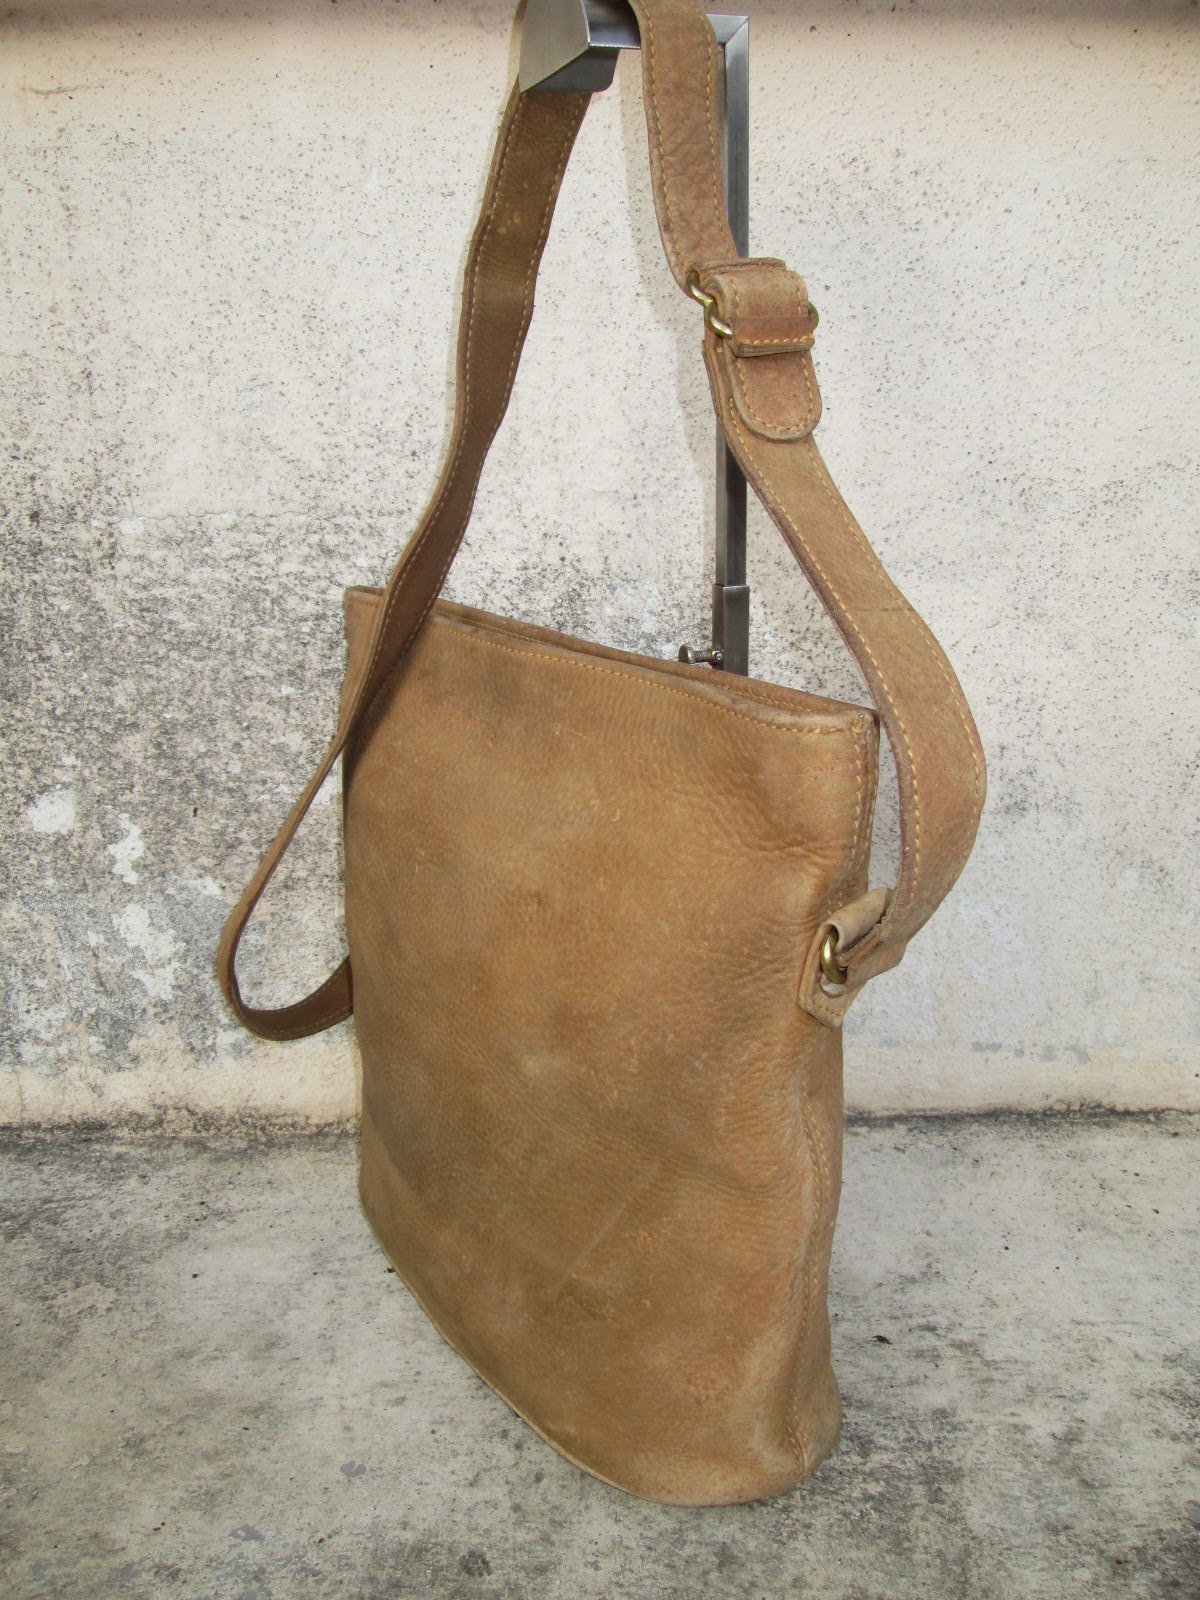 d0rayakEEbaG: Authentic Coach Cowhide Leather Crossbody/Sling Bag(SOLD)